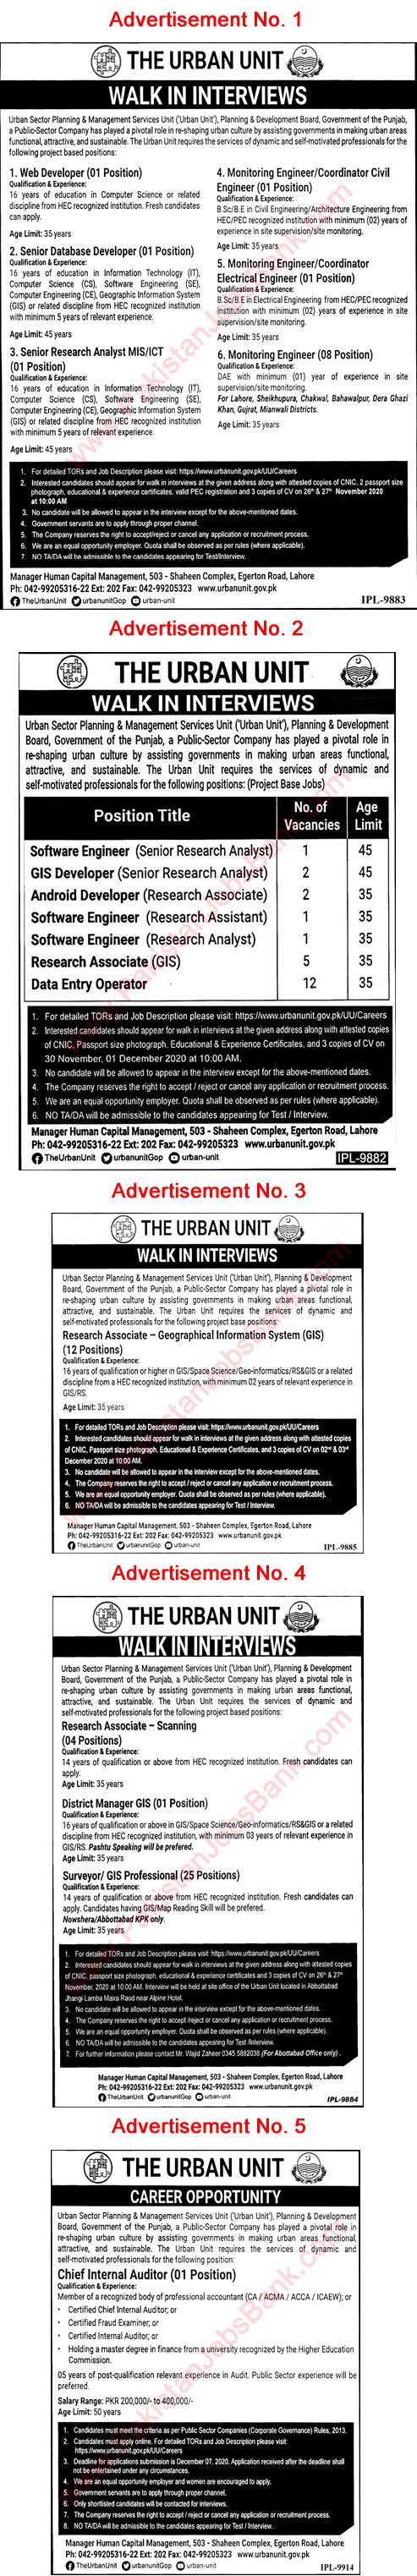 The Urban Unit Punjab Jobs November 2020 Walk In Interview Surveyors, Data Entry Operators & Others Latest